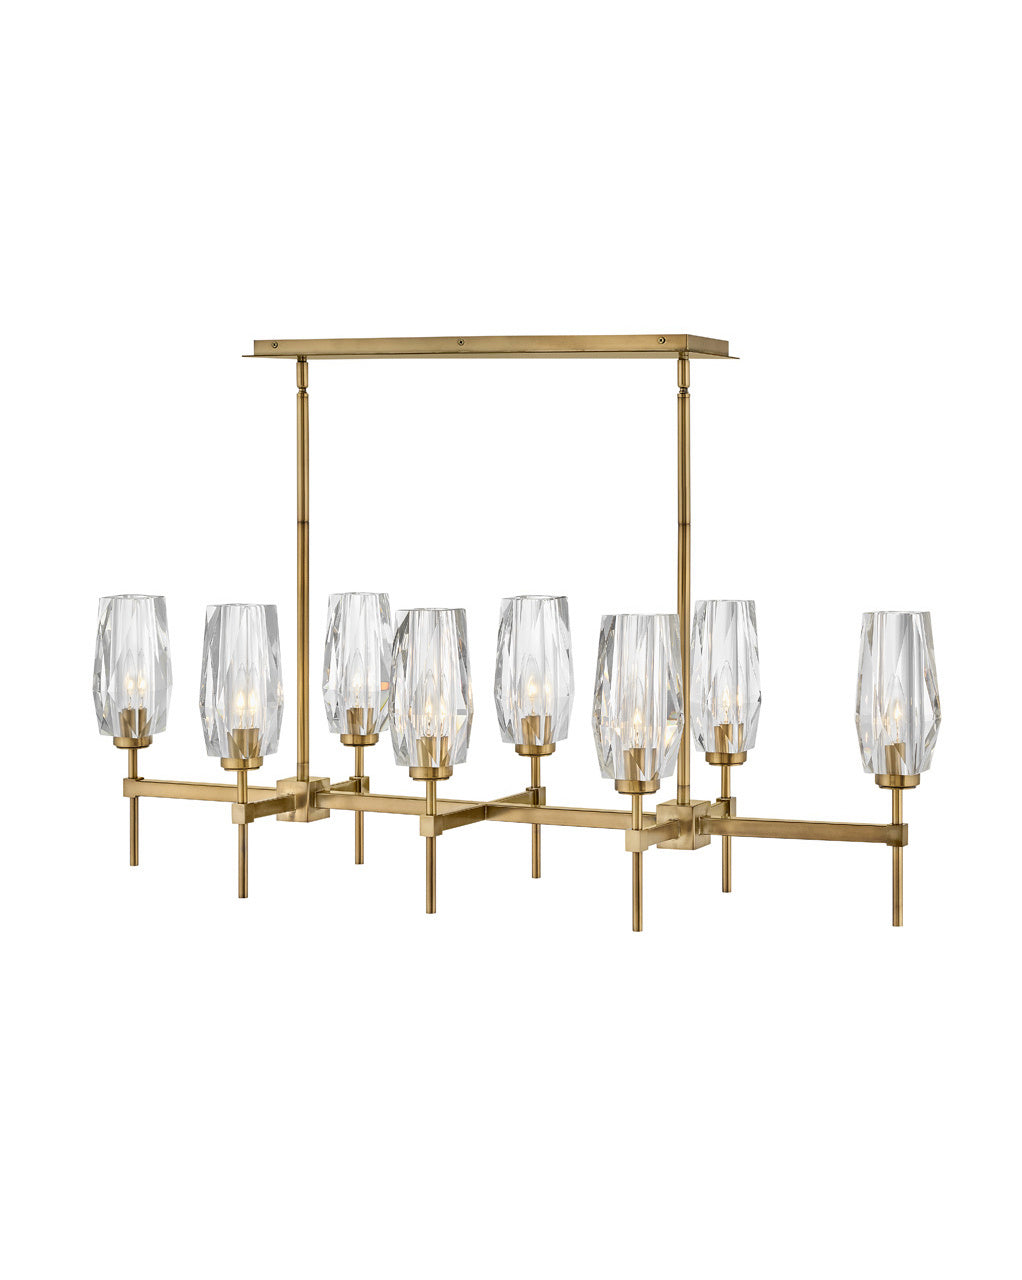 Ana LED Linear Chandelier in Heritage Brass